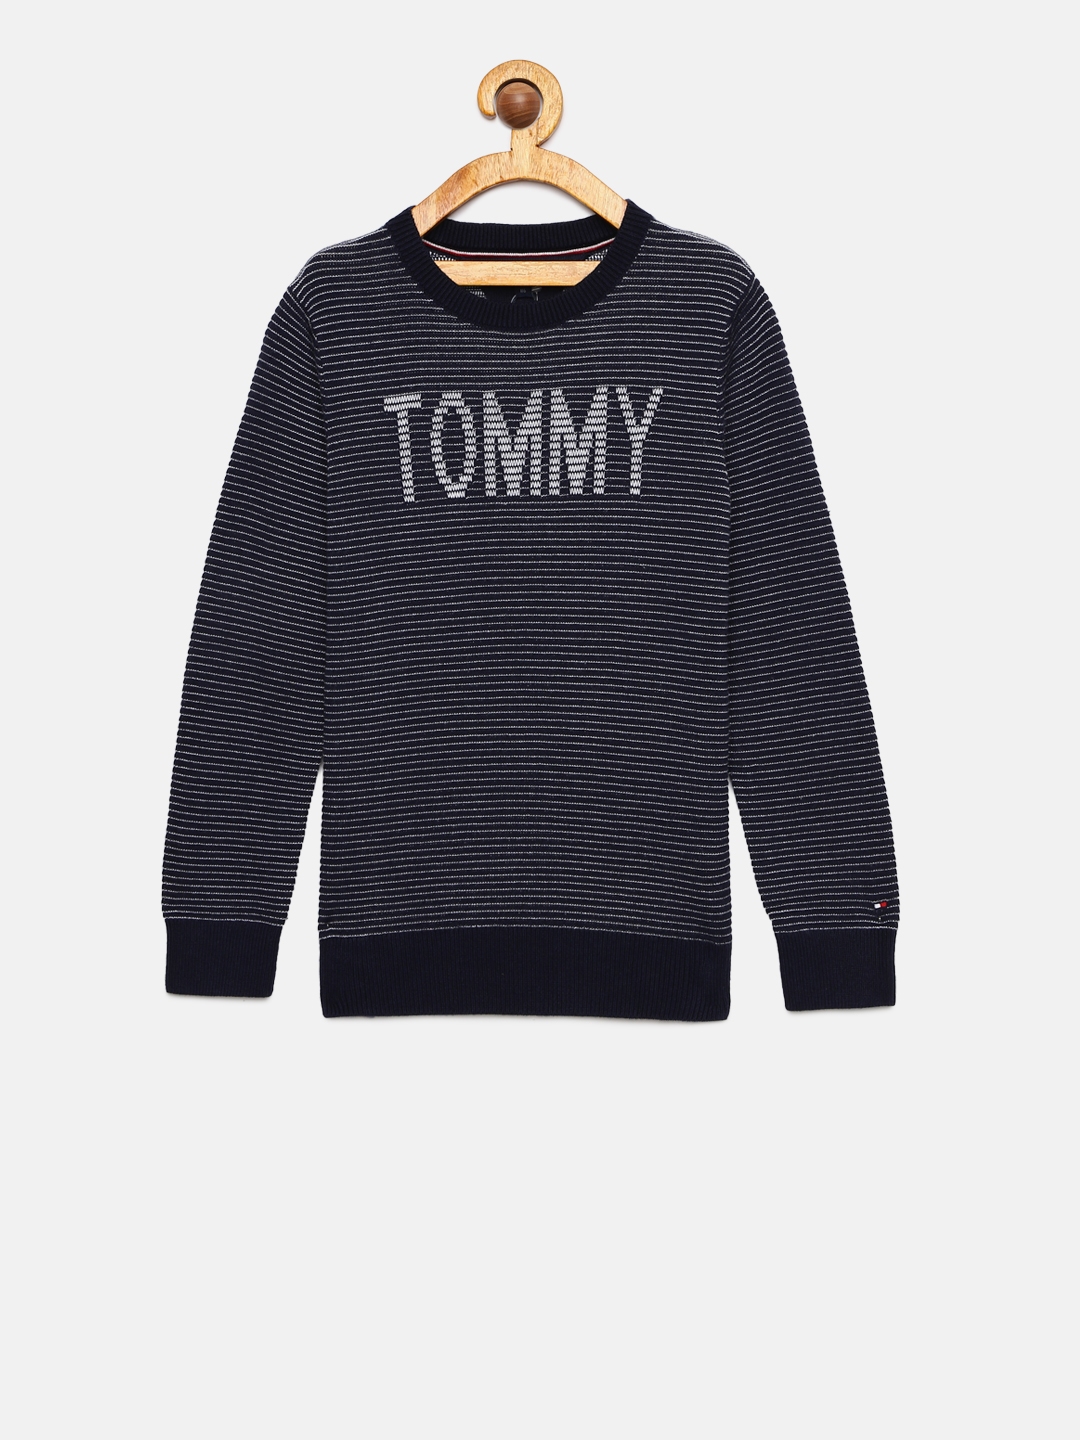 Buy Tommy Hilfiger Boys Navy Blue & White Striped Sweater - Sweaters ...